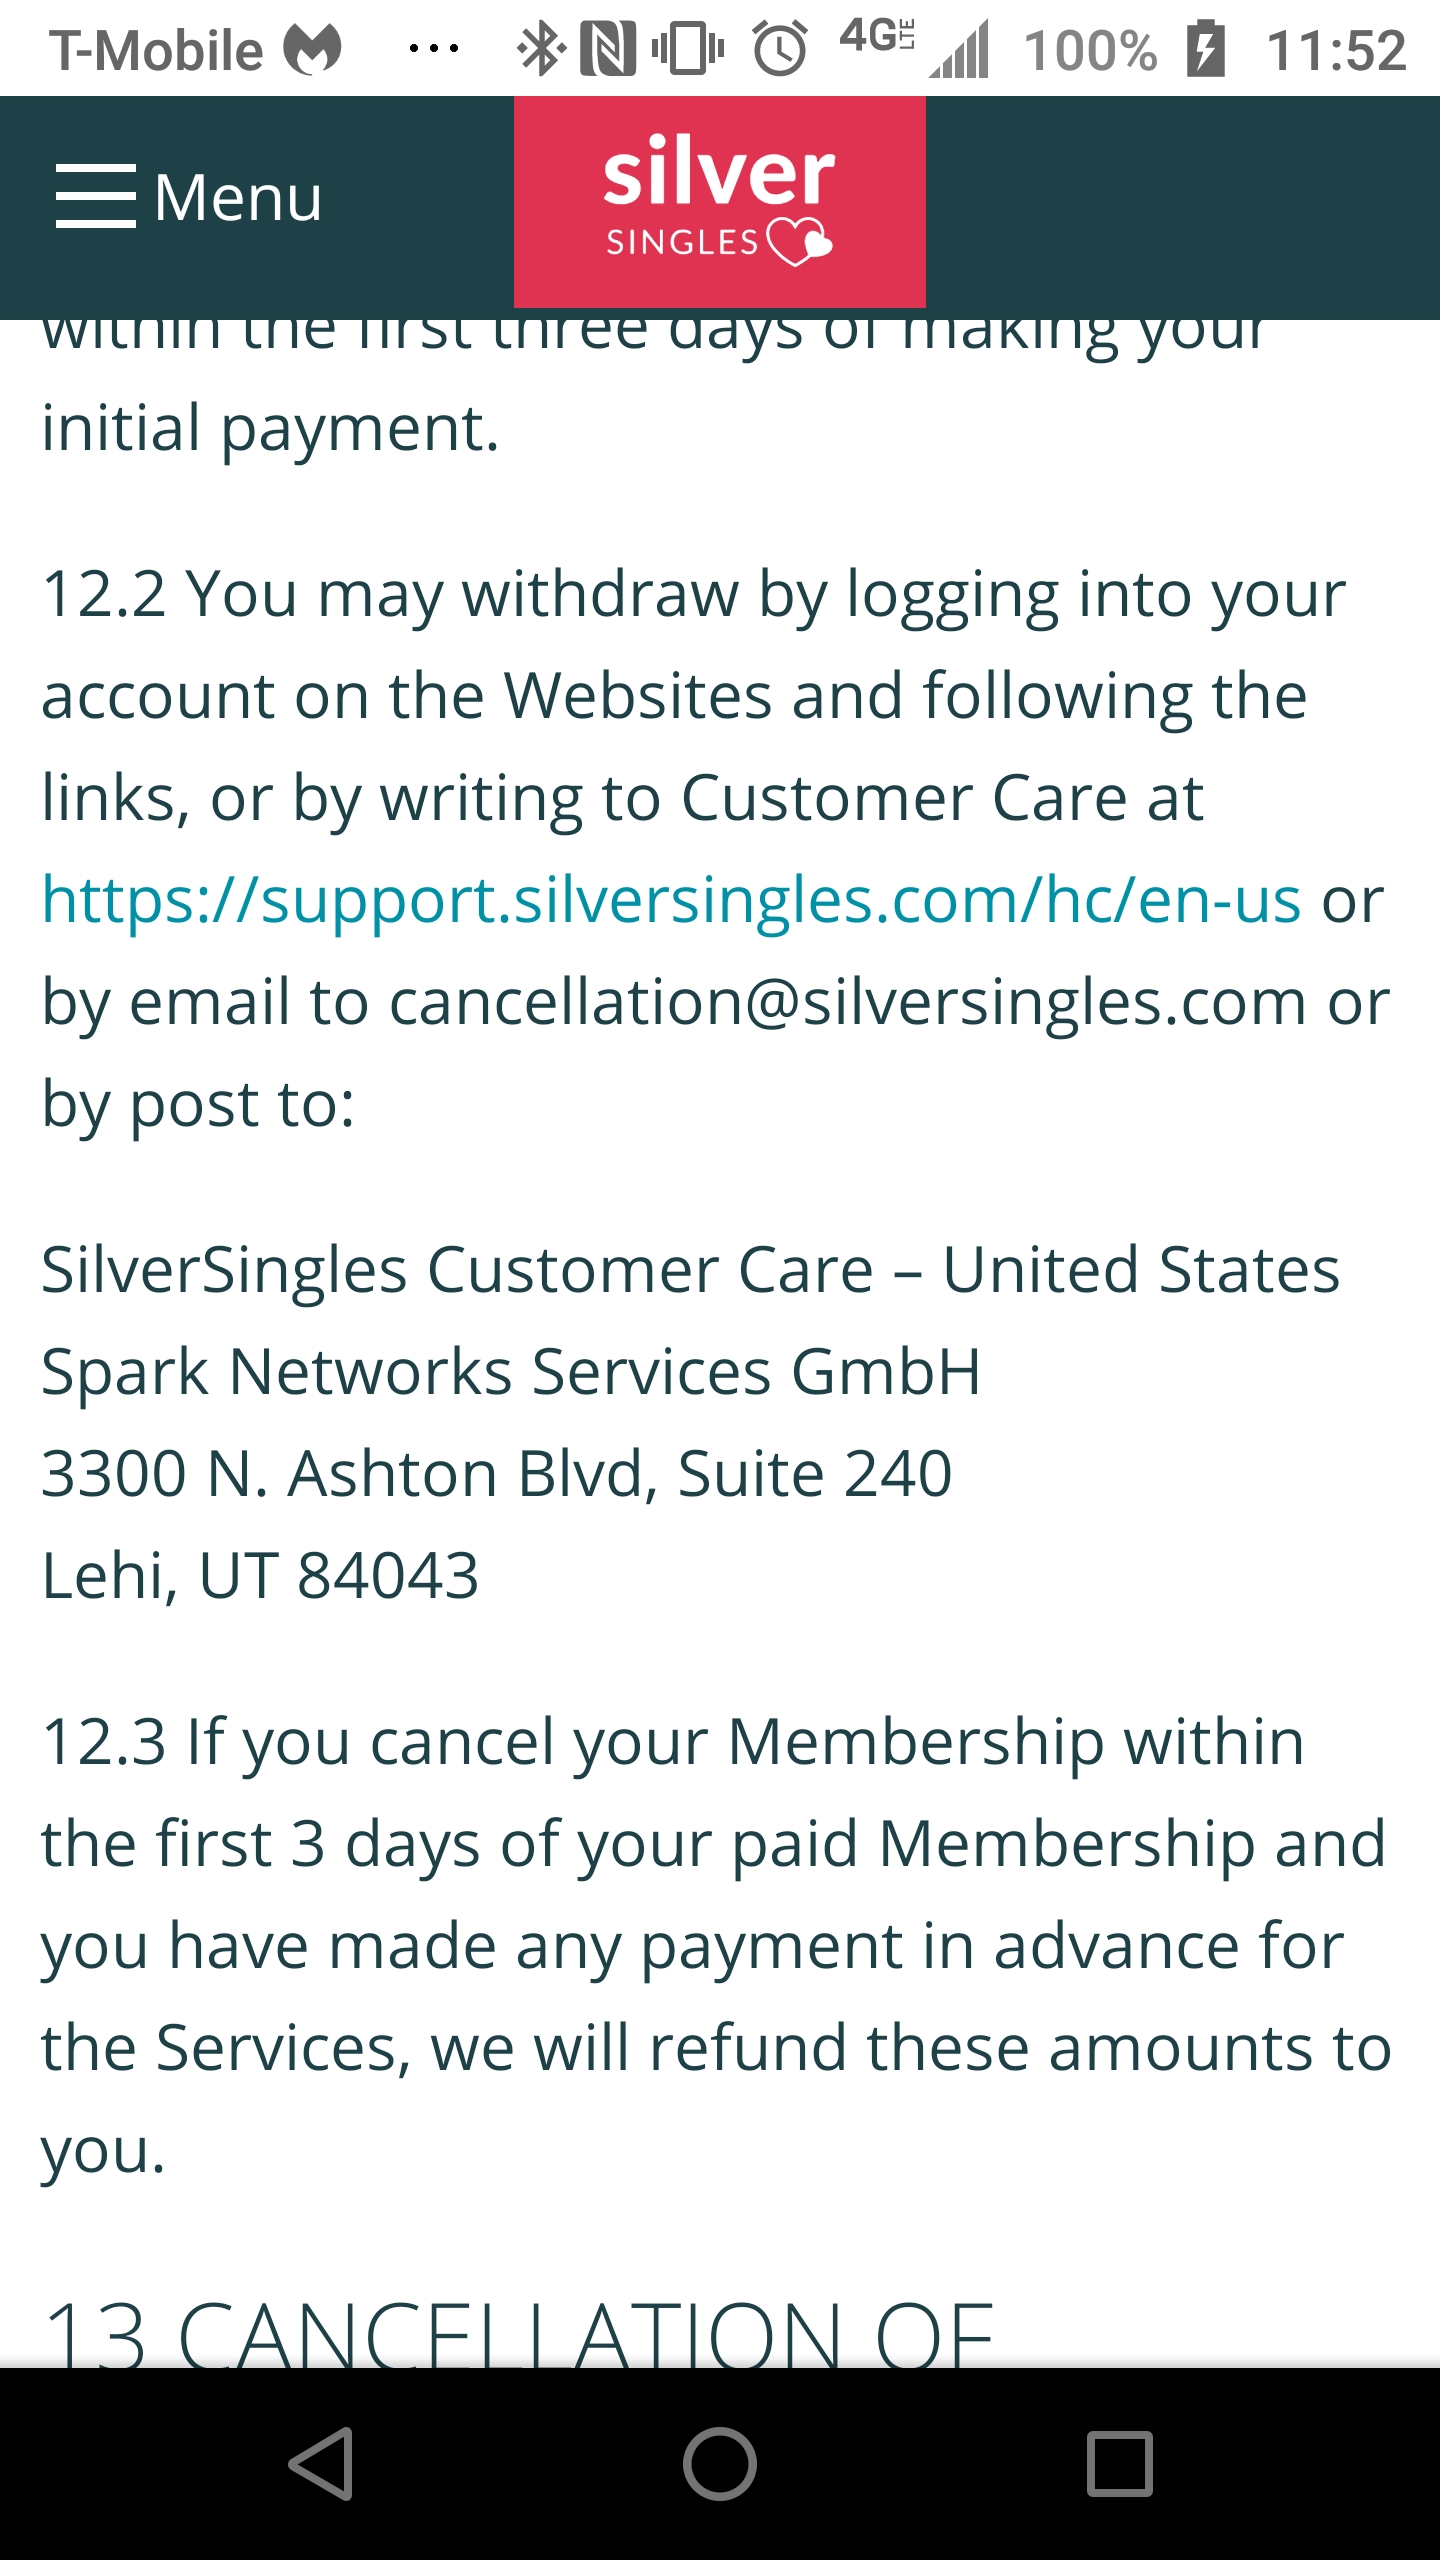 Silver singles cancellation policy